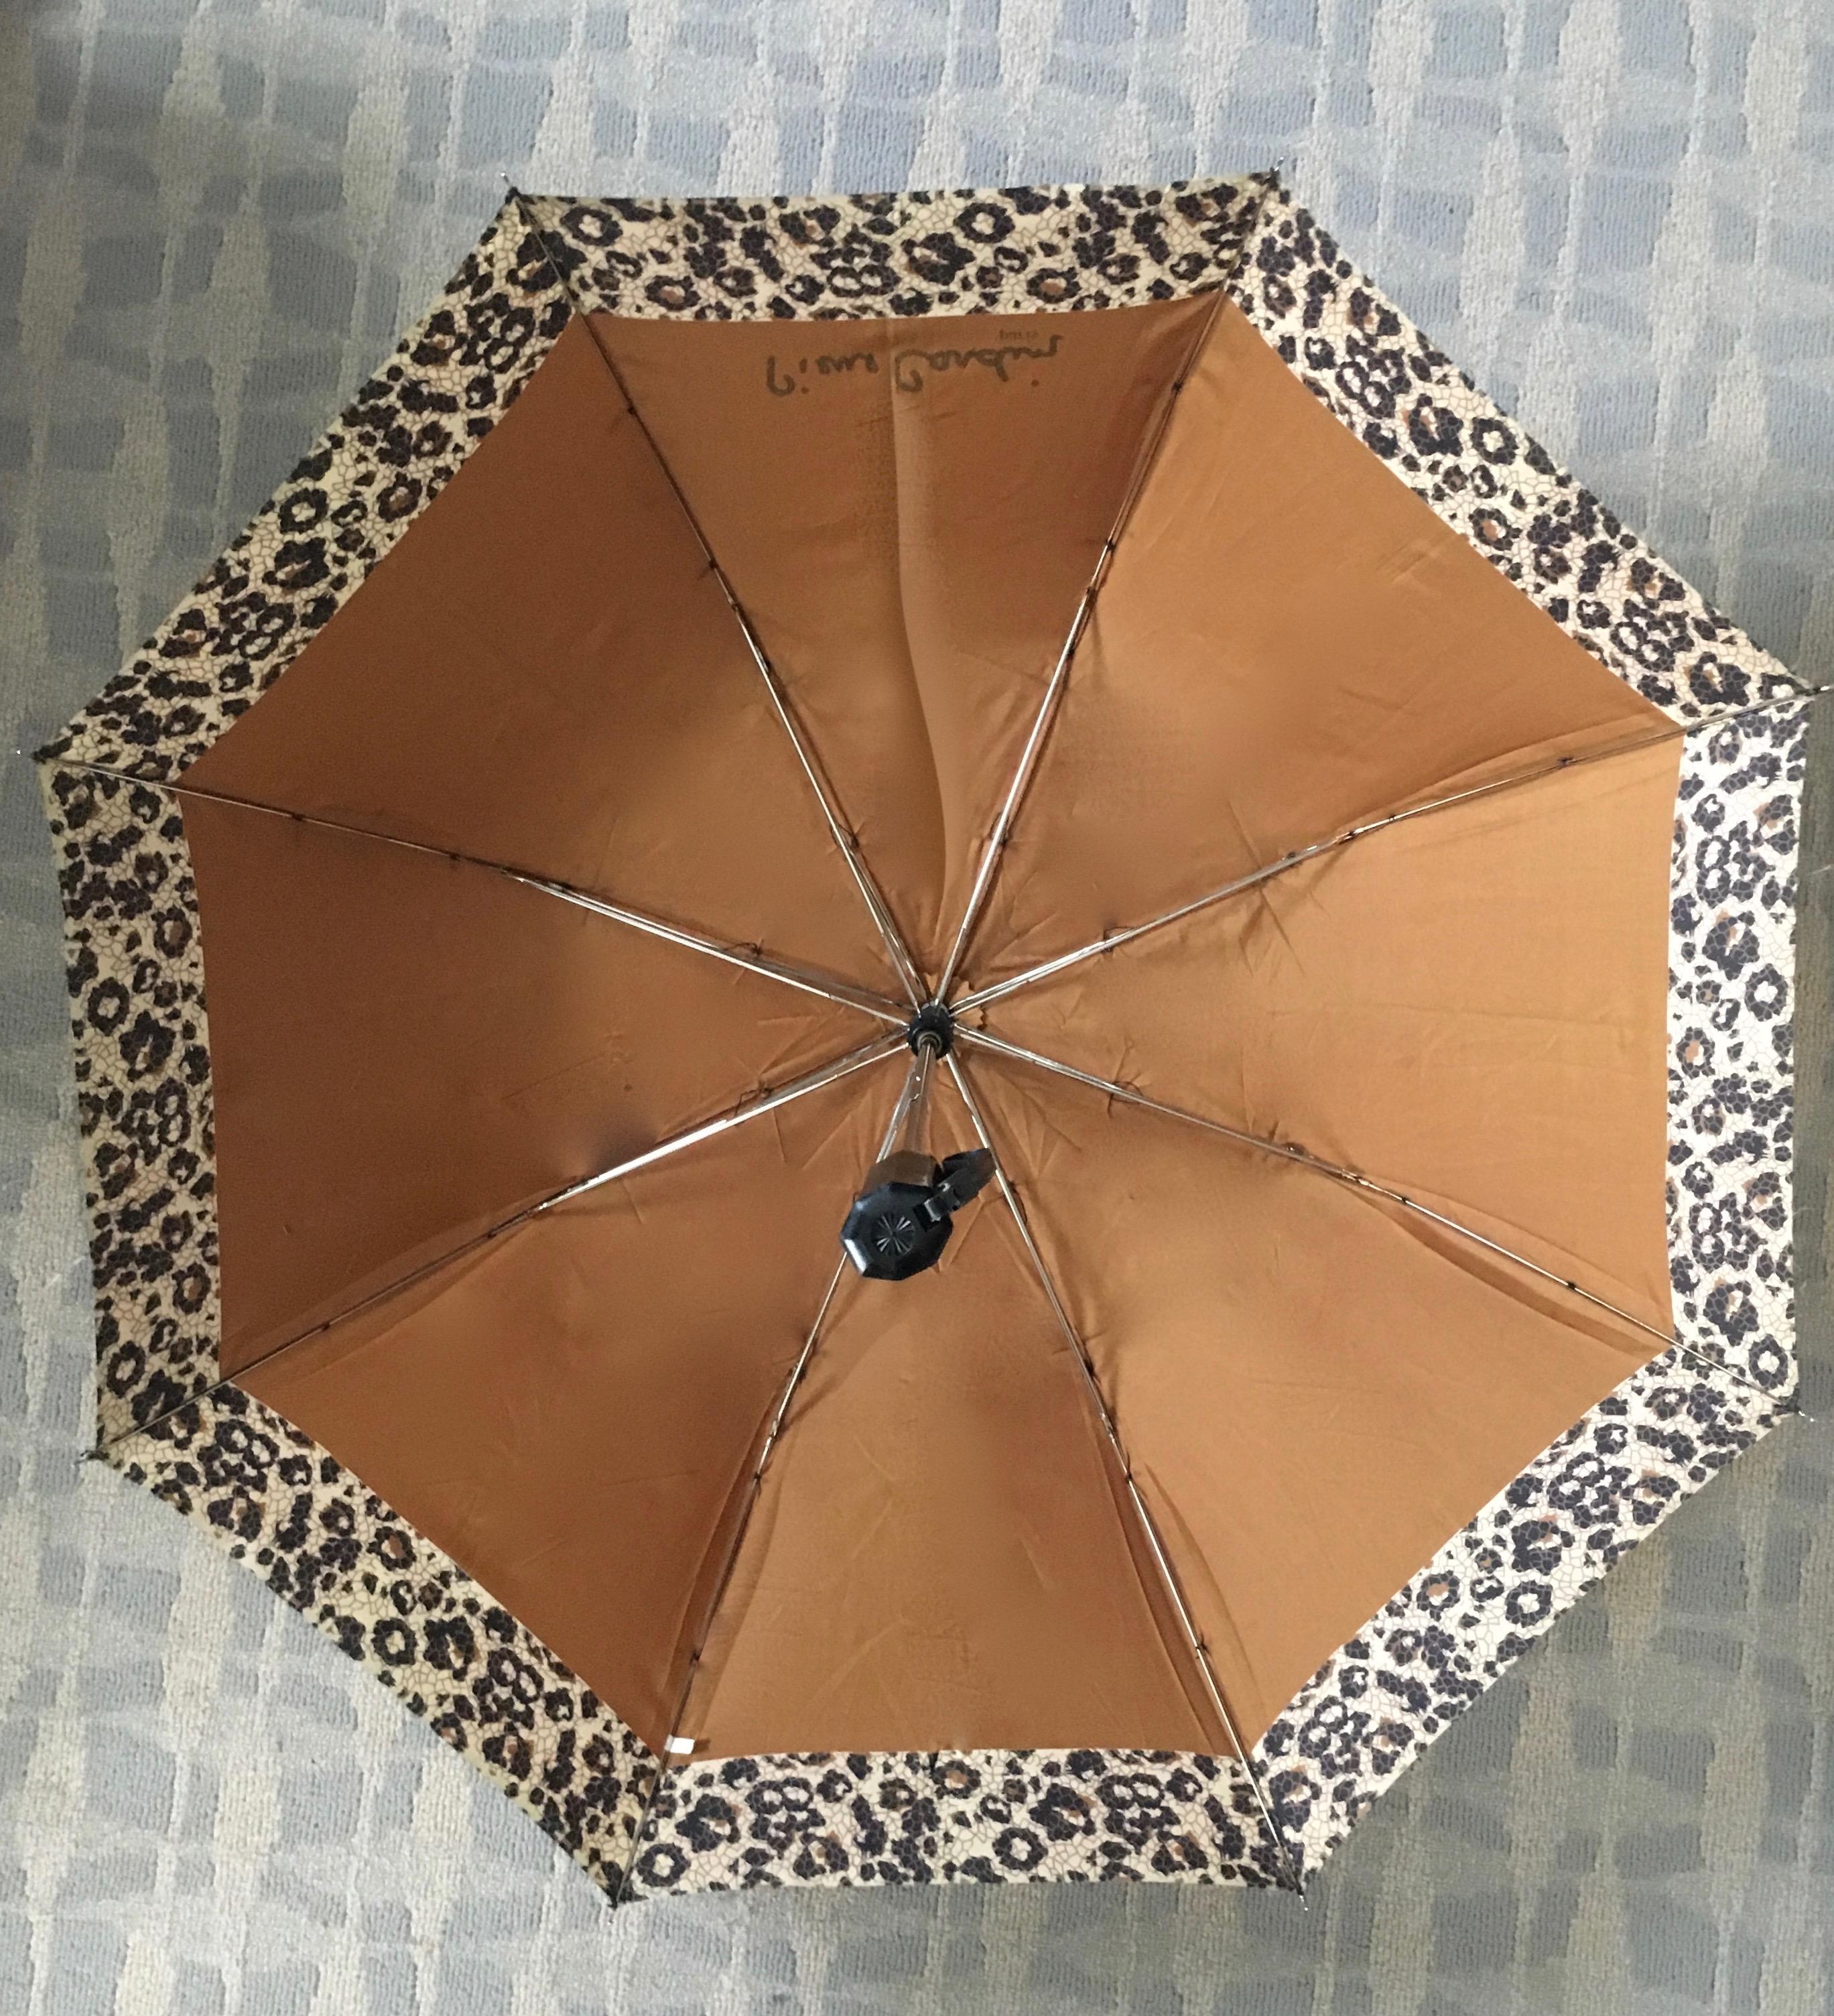 Pierre Cardin Vintage Umbrella with Leopard influenced design.  The umbrella is a portable and easy to carry automatic push button Umbrella, which still operates perfectly.  No damage, no cuts or damage and comes in original Pierre Cardin Case.

A